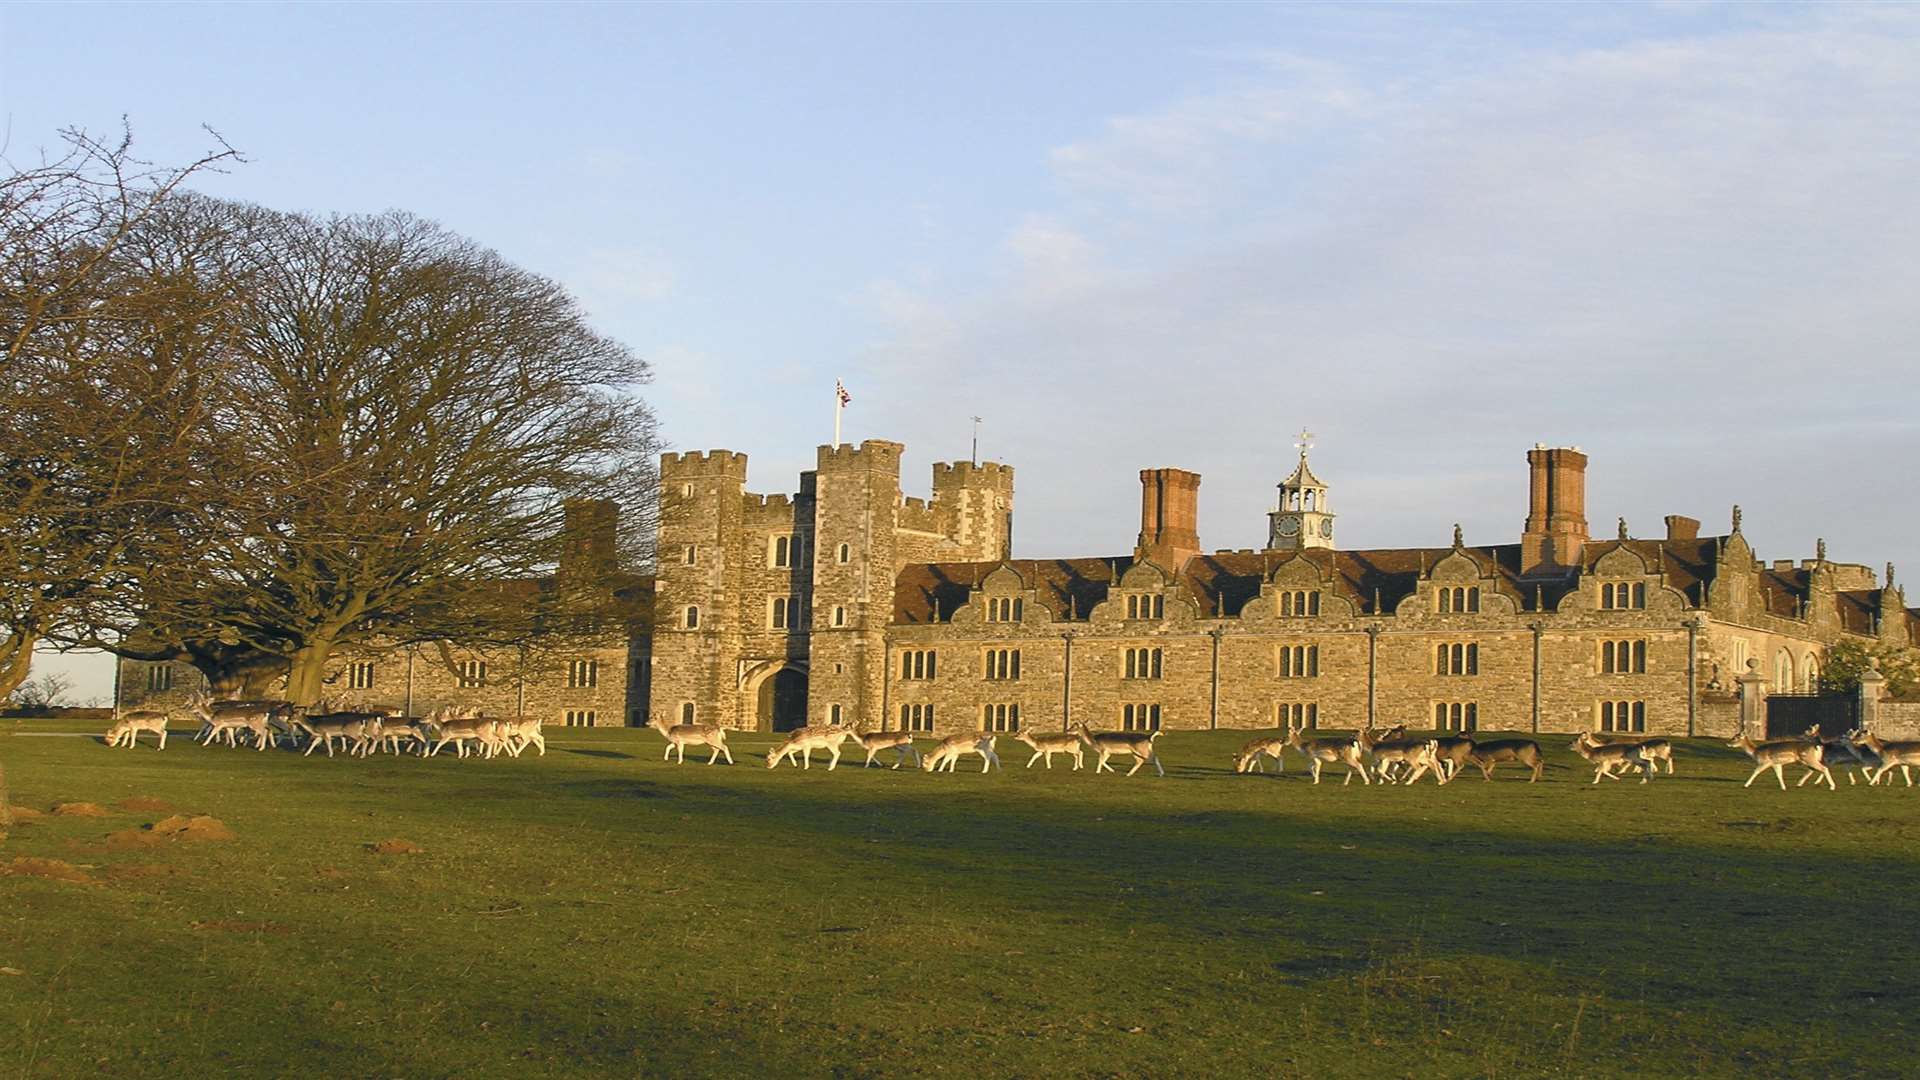 The body was discovered in Knole Park, Sevenoaks